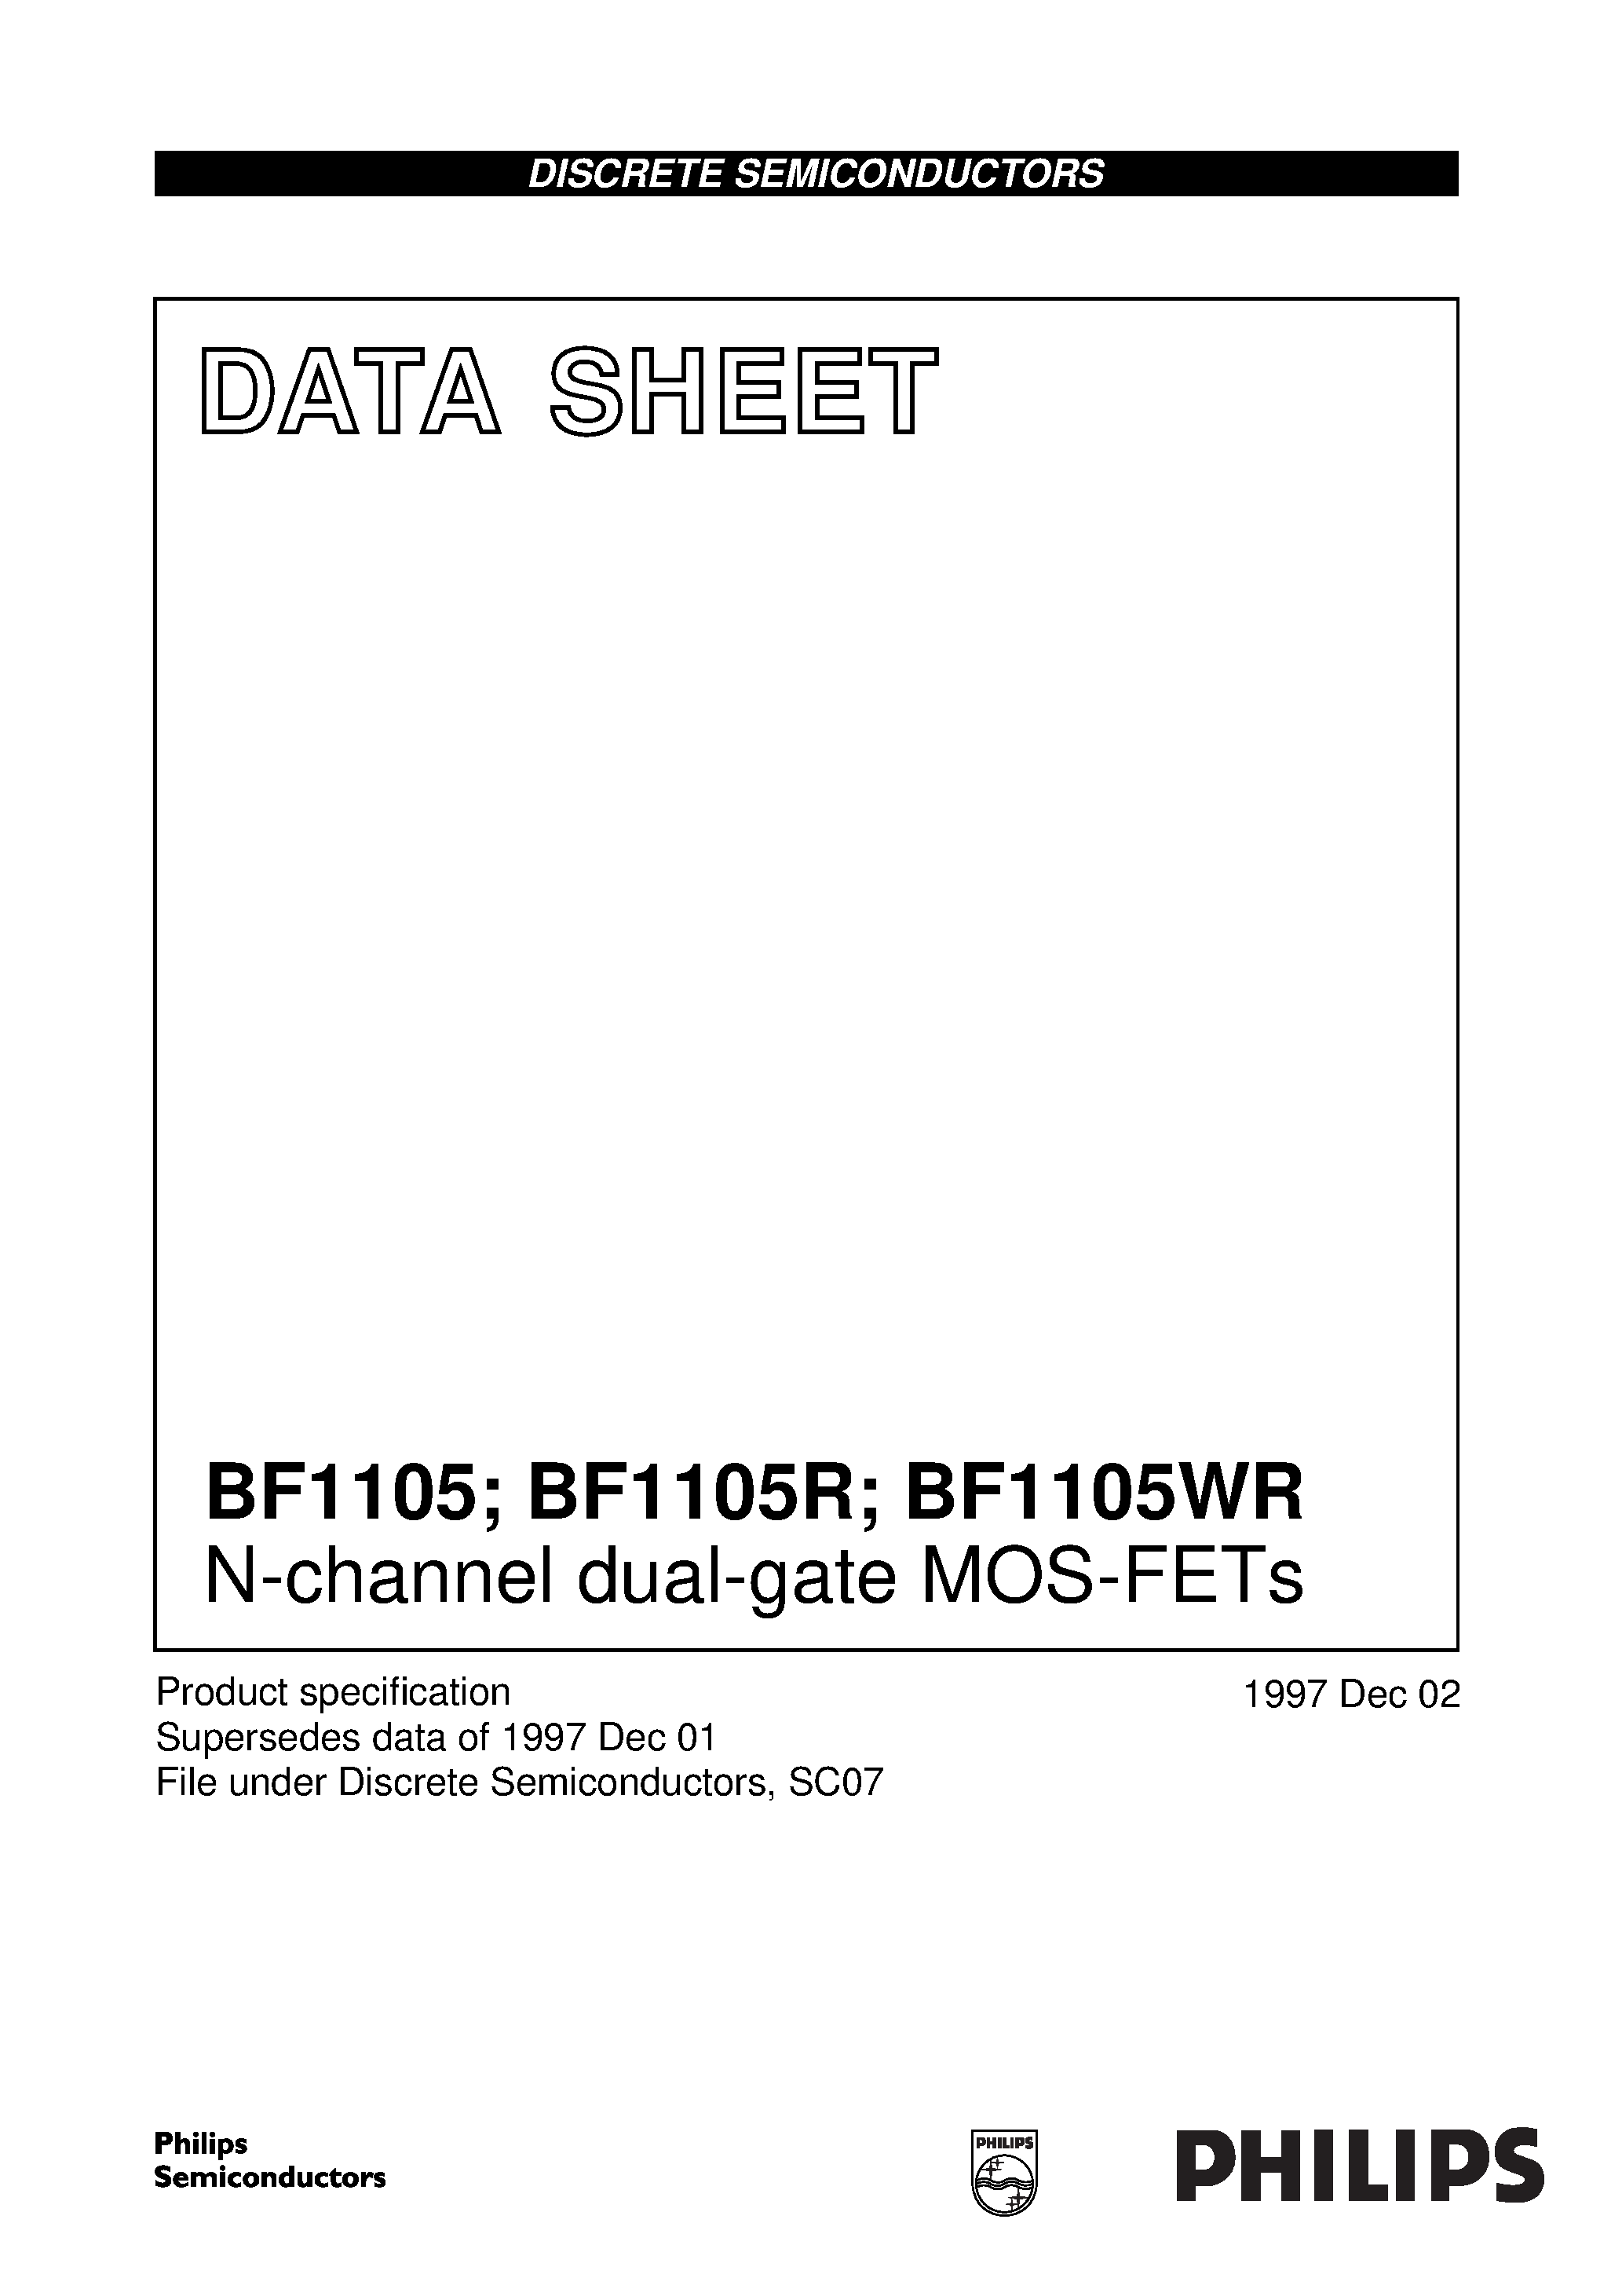 Datasheet BF1105 - N-channel dual-gate MOS-FETs page 1